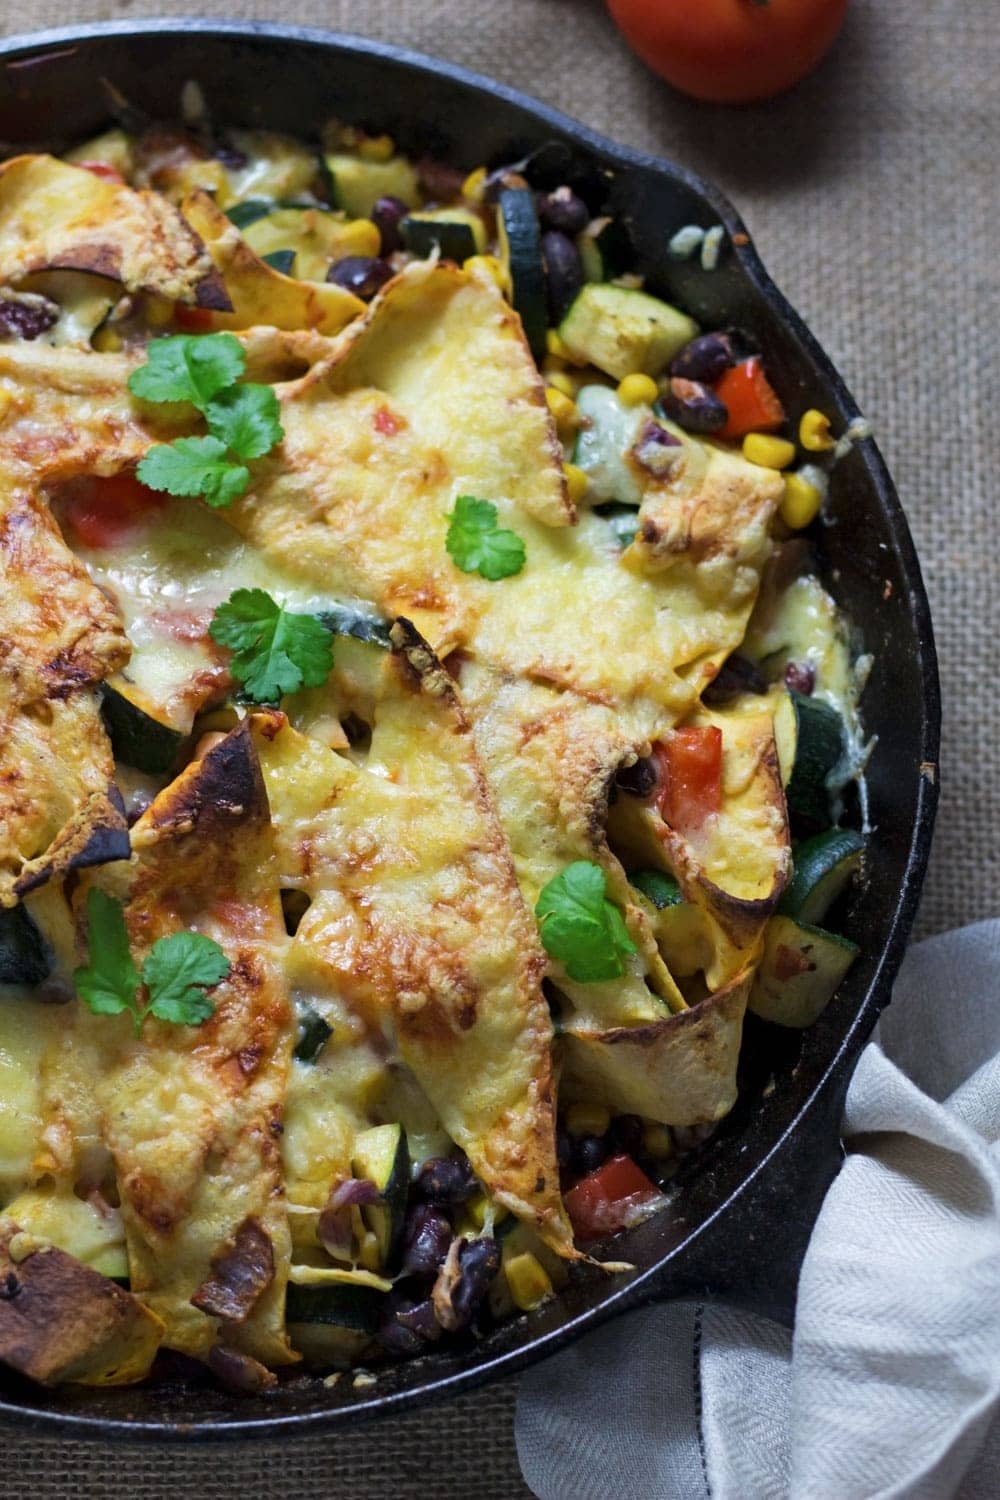 This veggie enchilada skillet is super healthy and full of spicy Mexican flavours! Perfect for a weeknight vegetarian dinner and great for leftovers too.